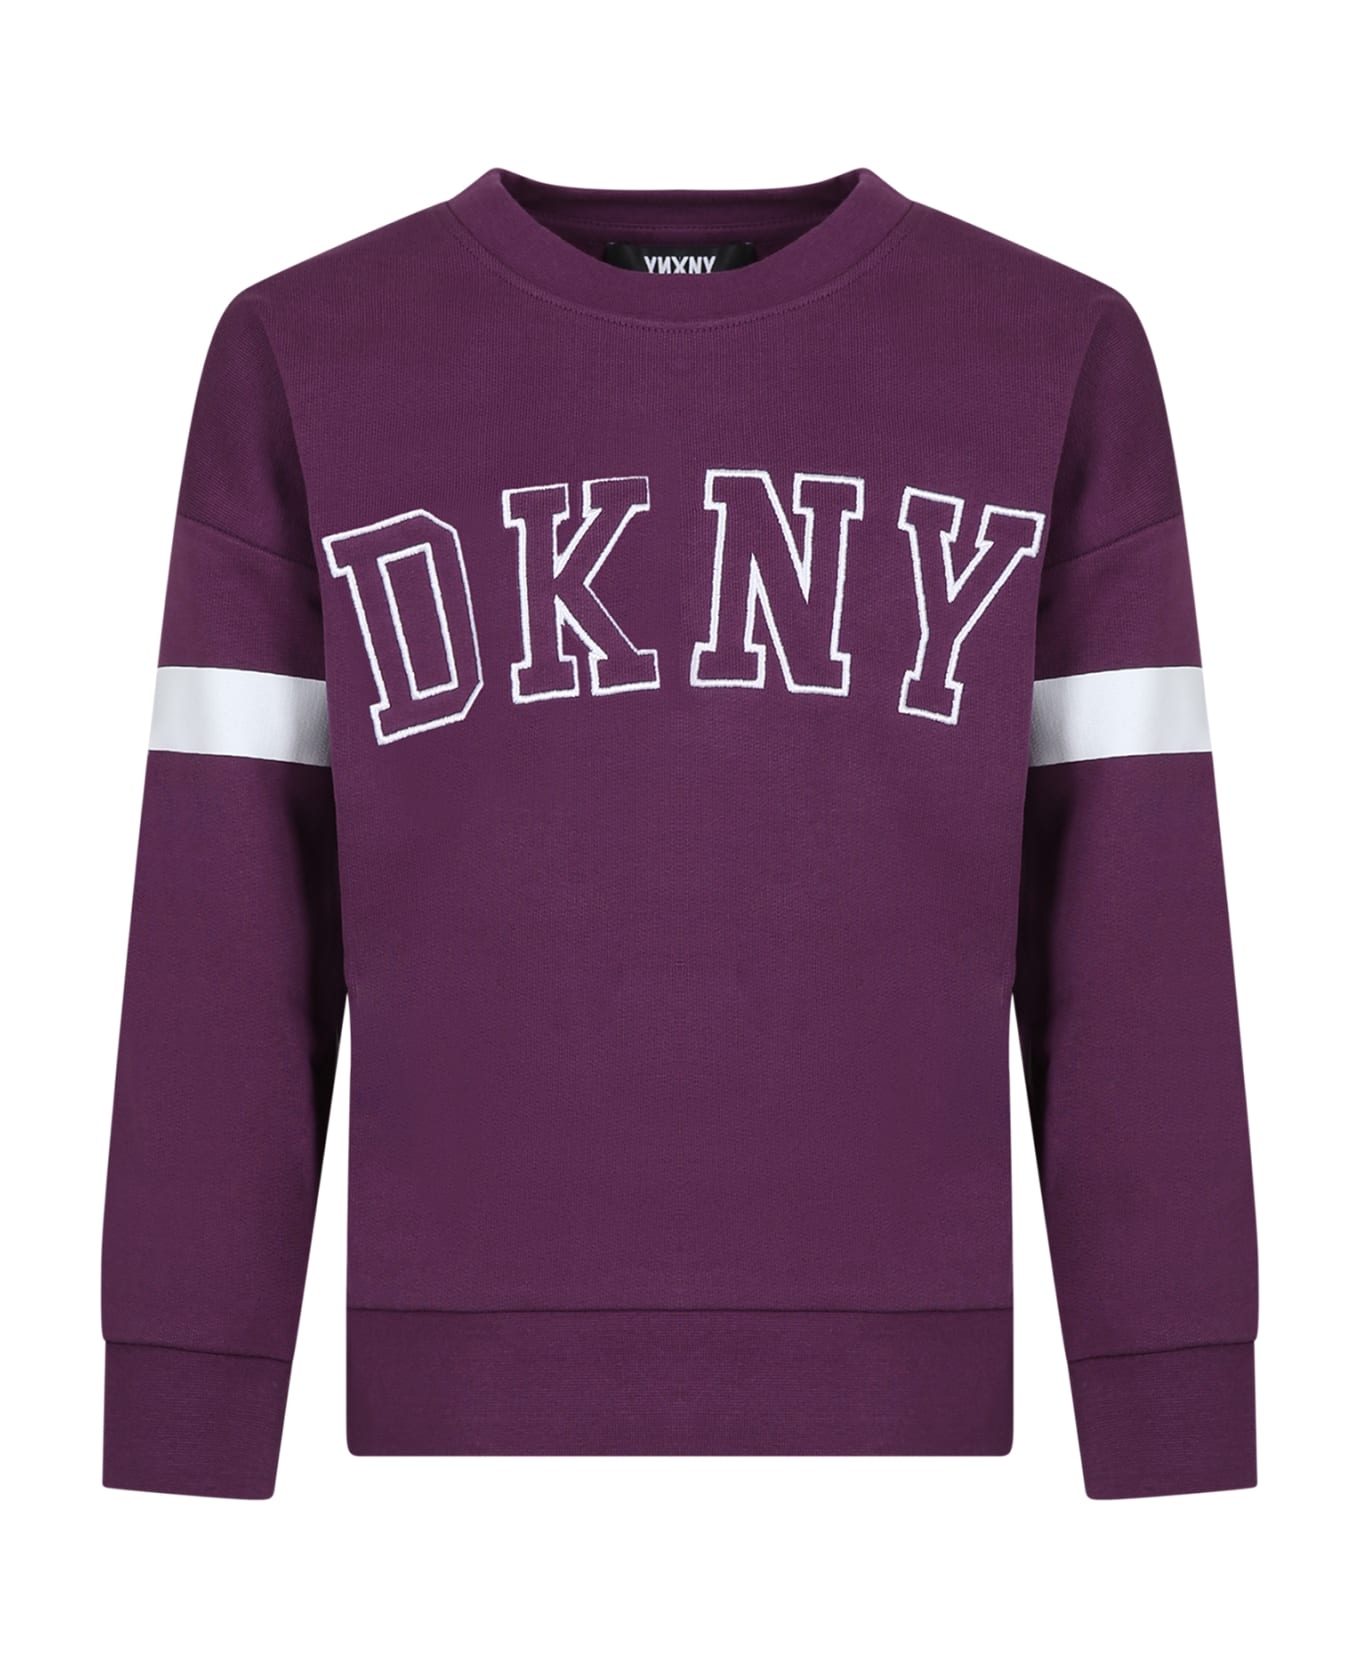 DKNY Purple Sweatshirt For Girl With Logo - Violet